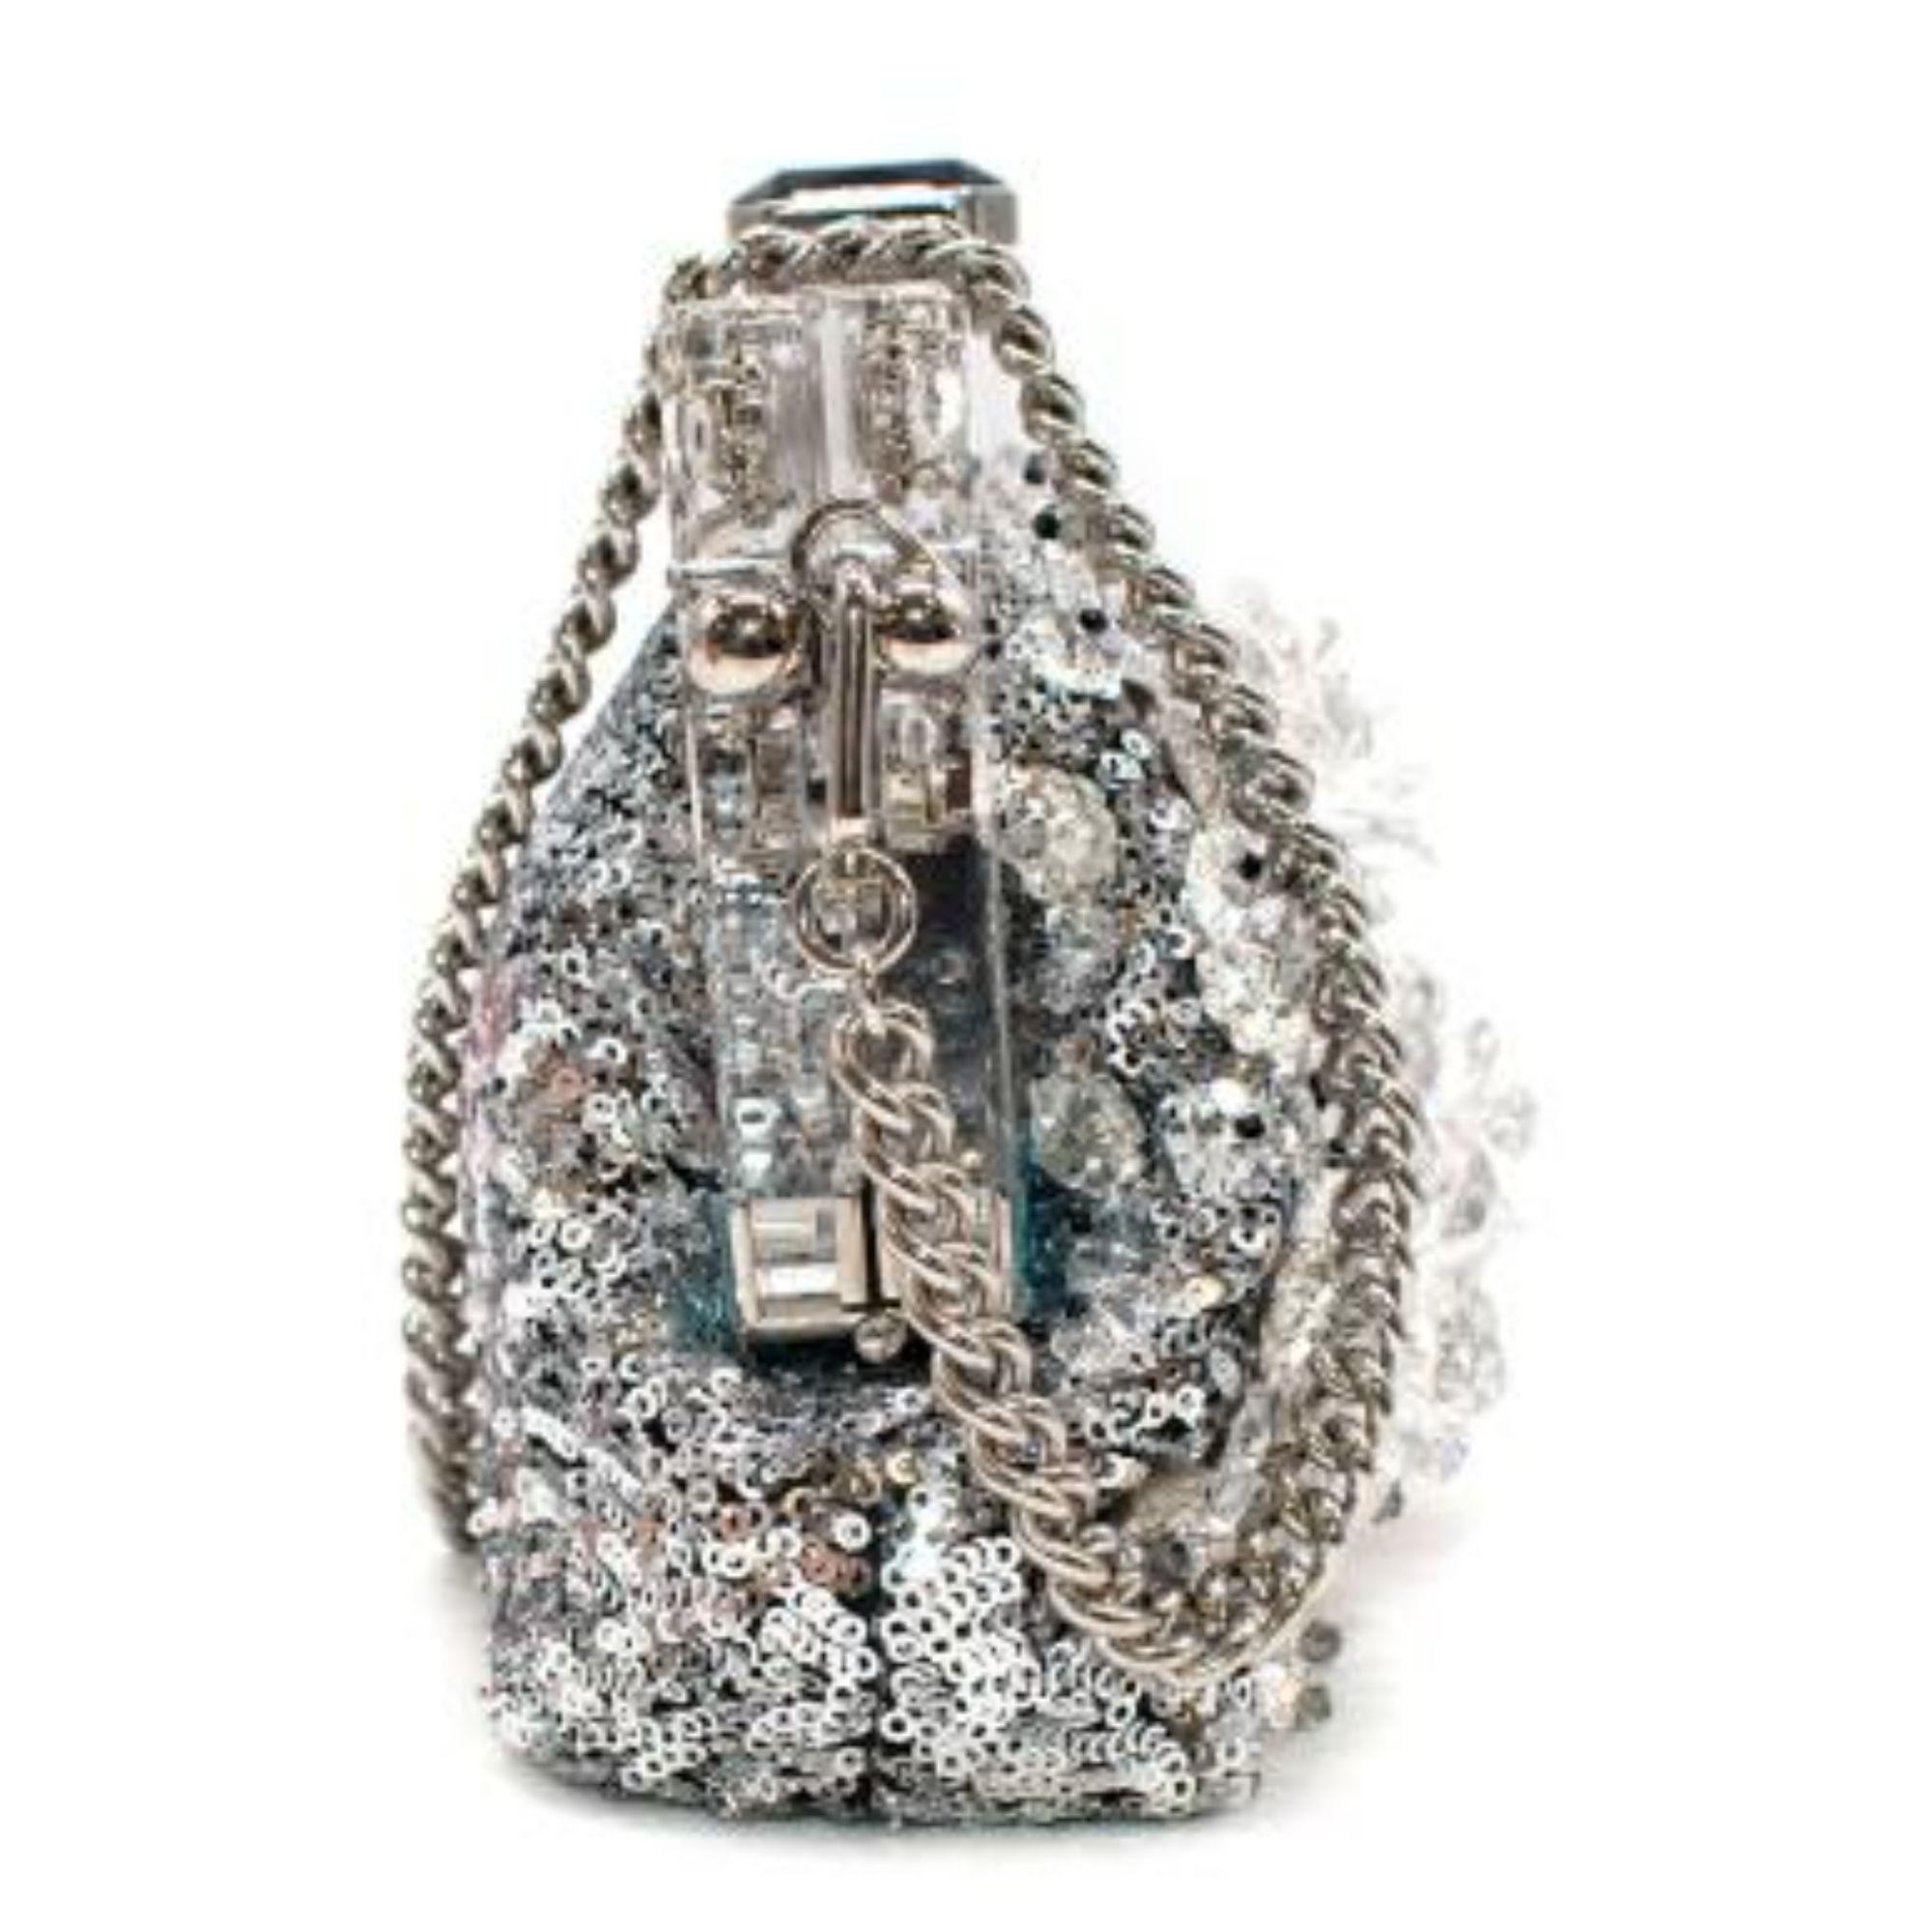 Dolce & Gabbana Vanda small embellished clutch In Excellent Condition For Sale In London, GB